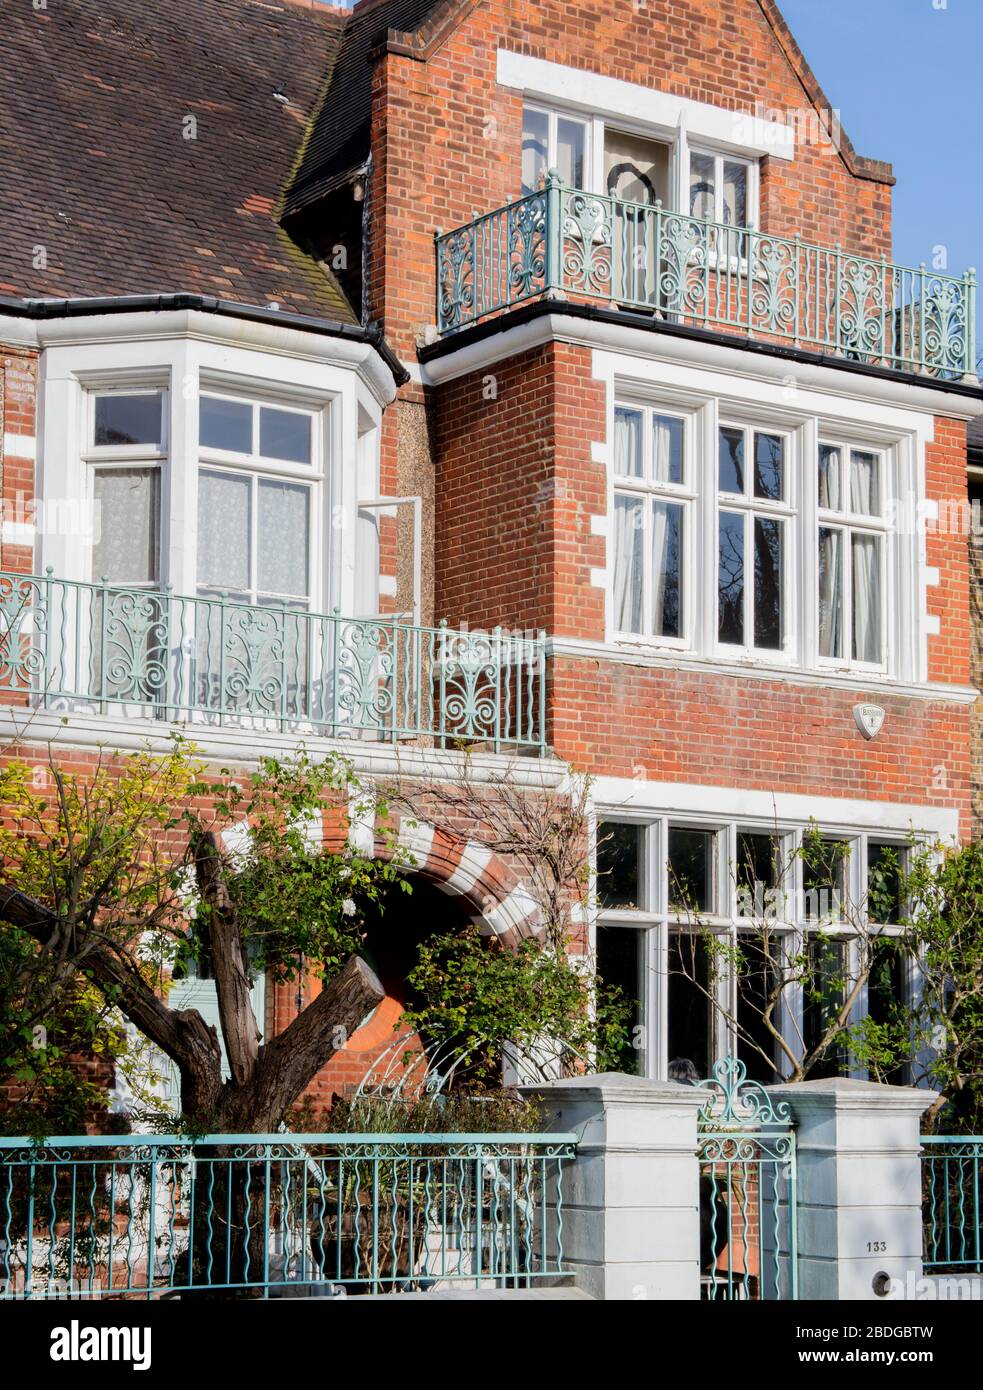 J.M Barrie's house in 133 Gloucester Road, Kensington, London; the upper balcony is the inspiration for the Darling children's nursery in Peter Pan Stock Photo